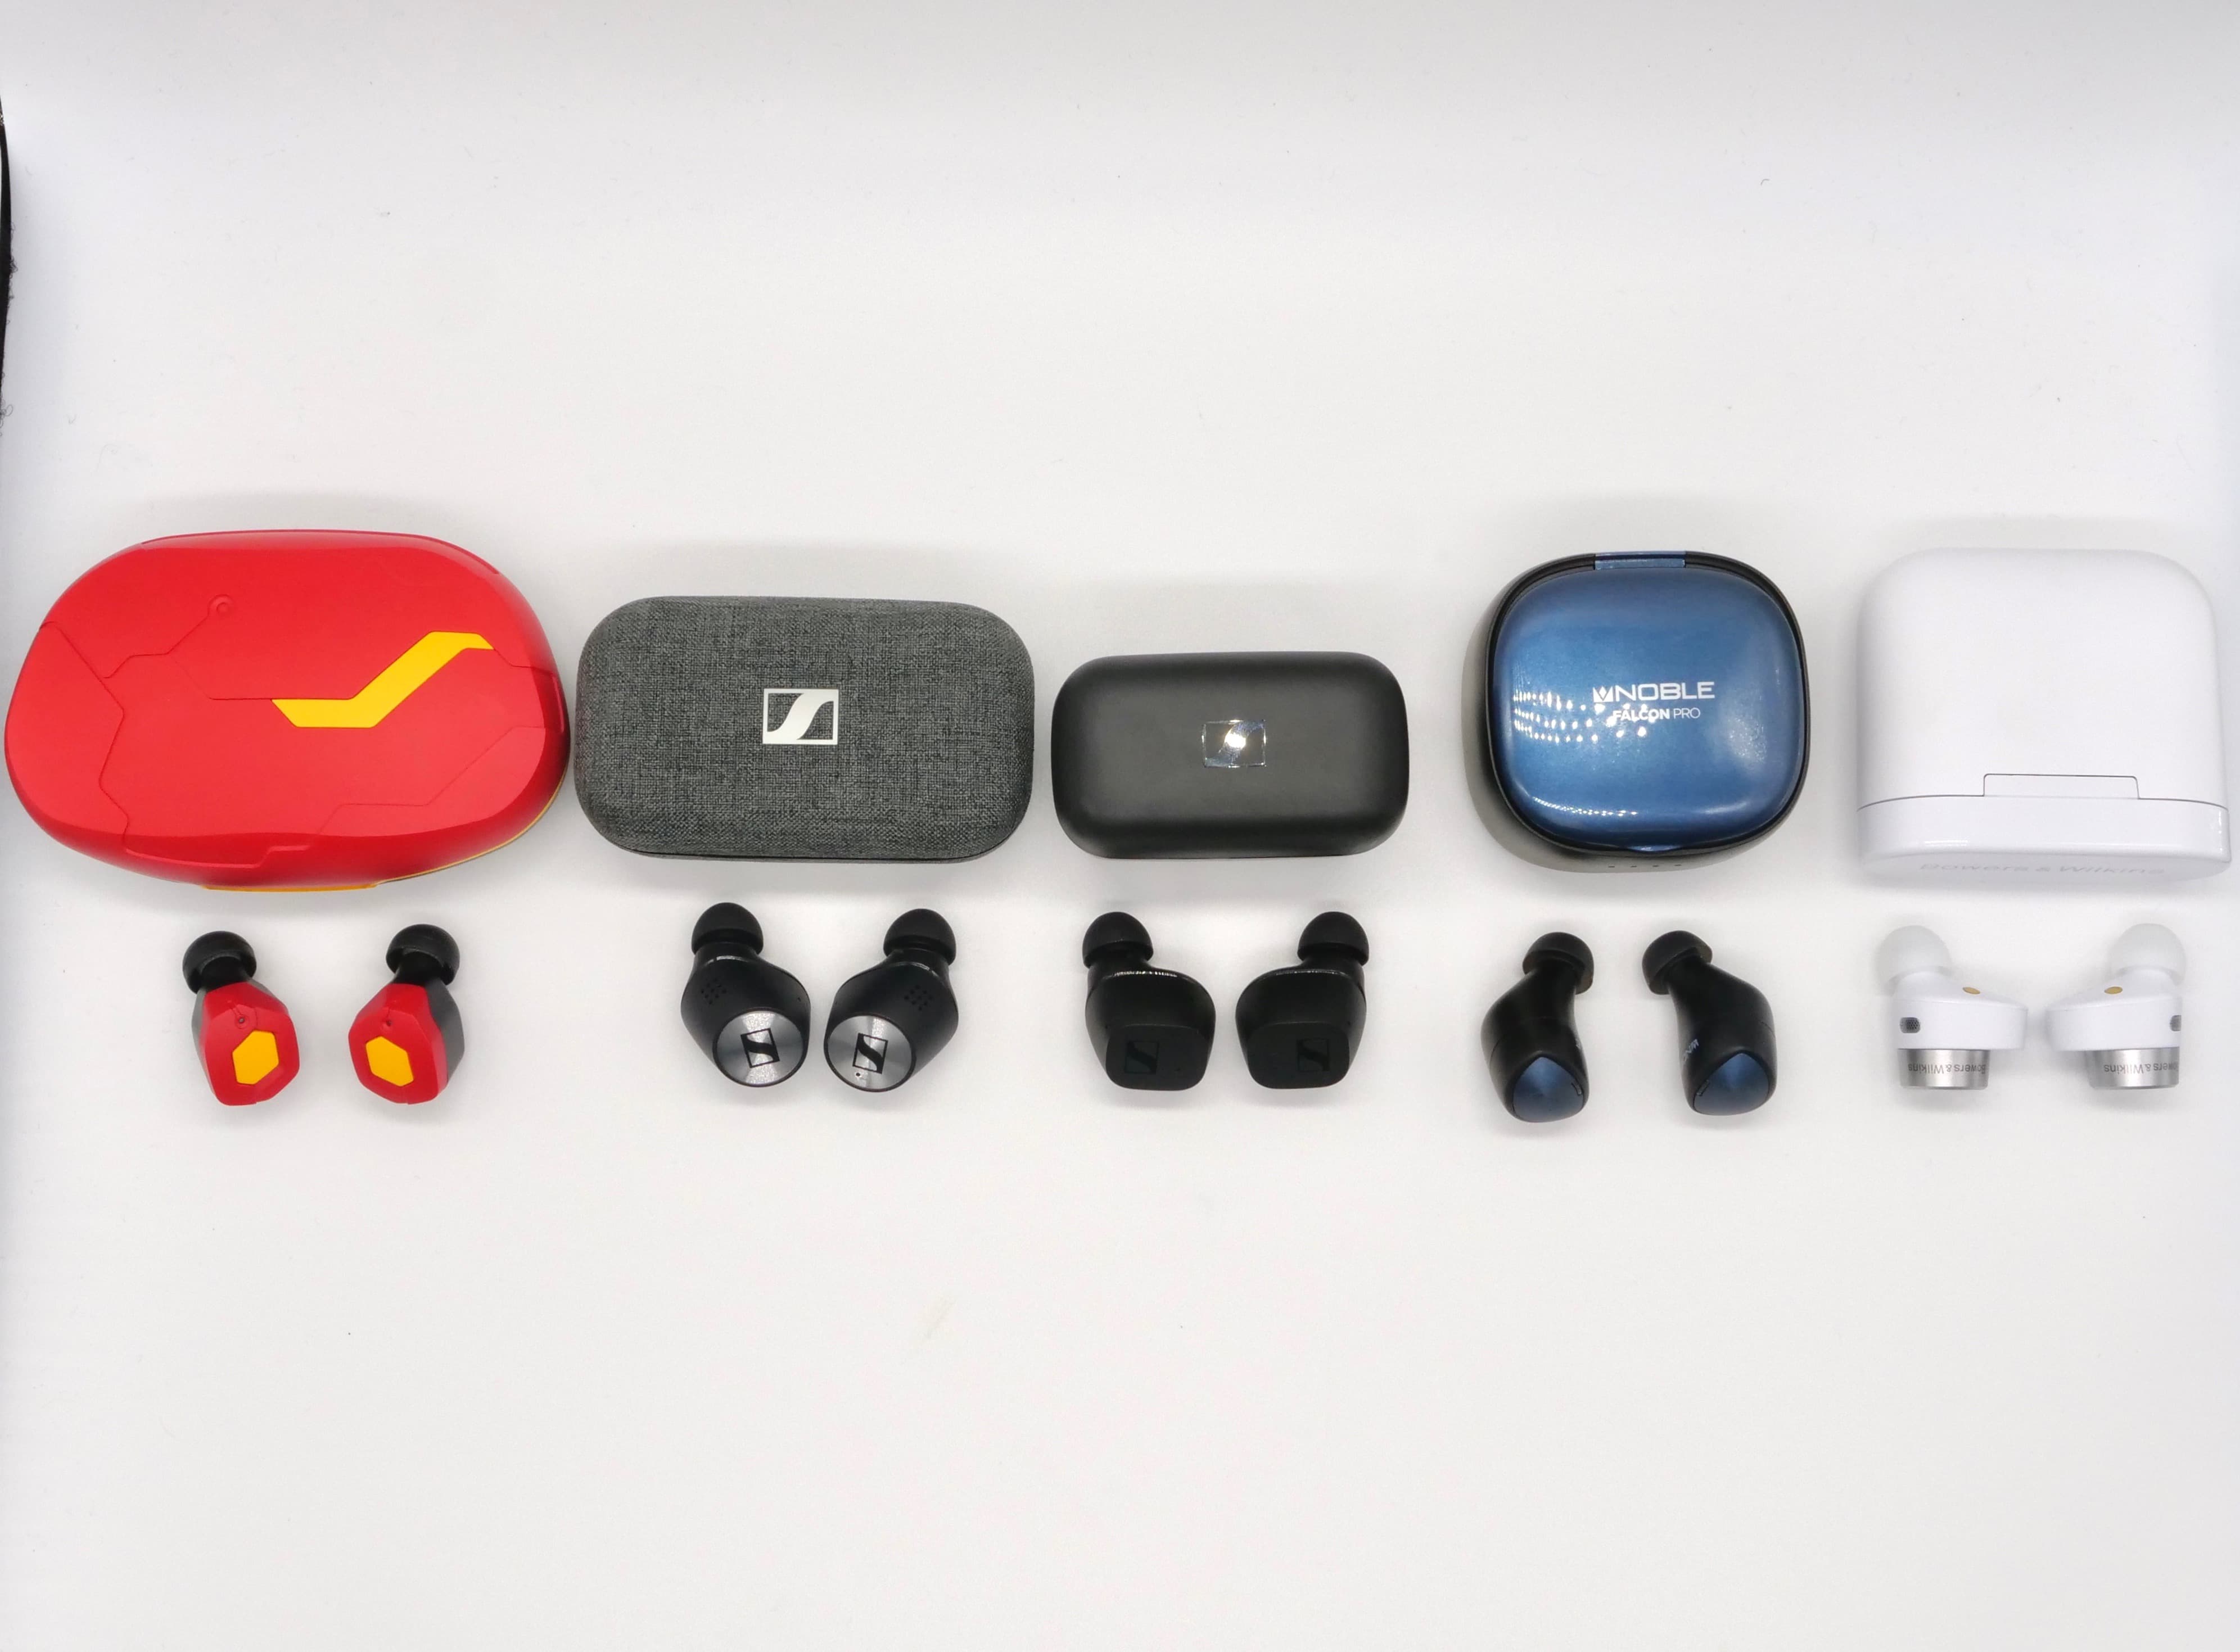 Best True Wireless Earbuds 2021 - If You're Considering Airpods, Check These out Too